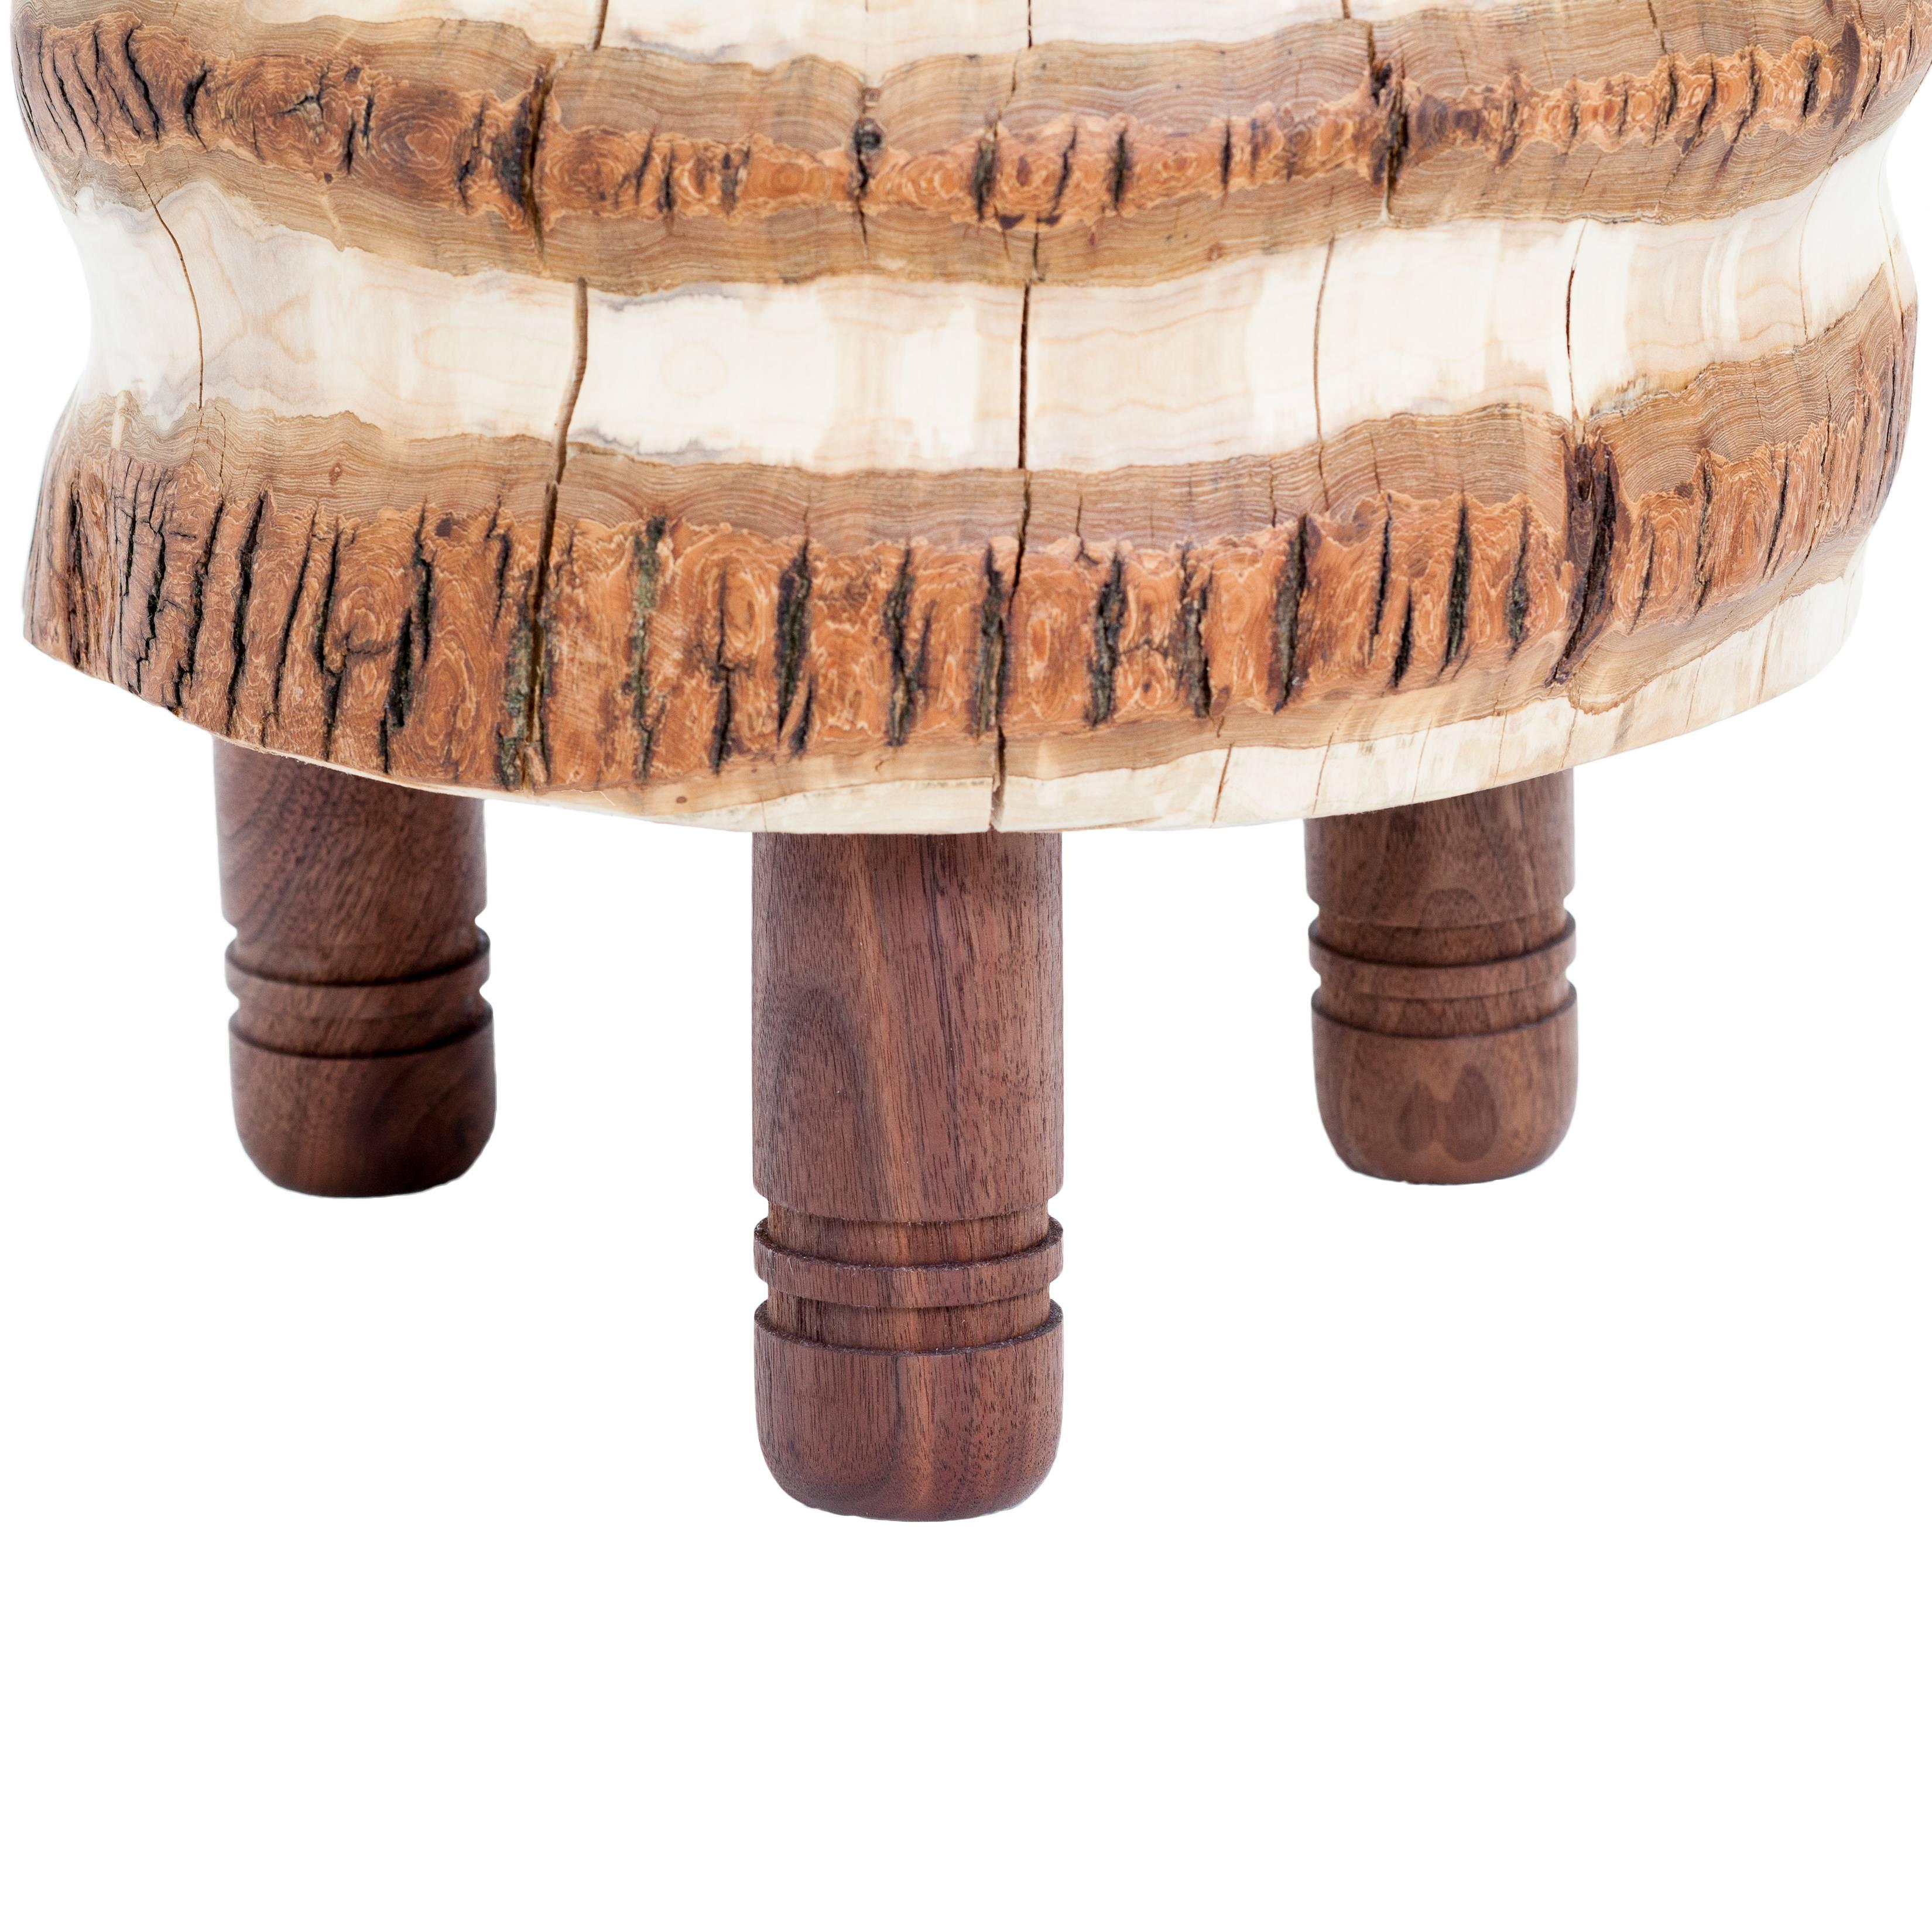 Inlay Reclaimed Salvaged Hurricane Sandy Stump Stools with Hand-Turned Legs & Drawers